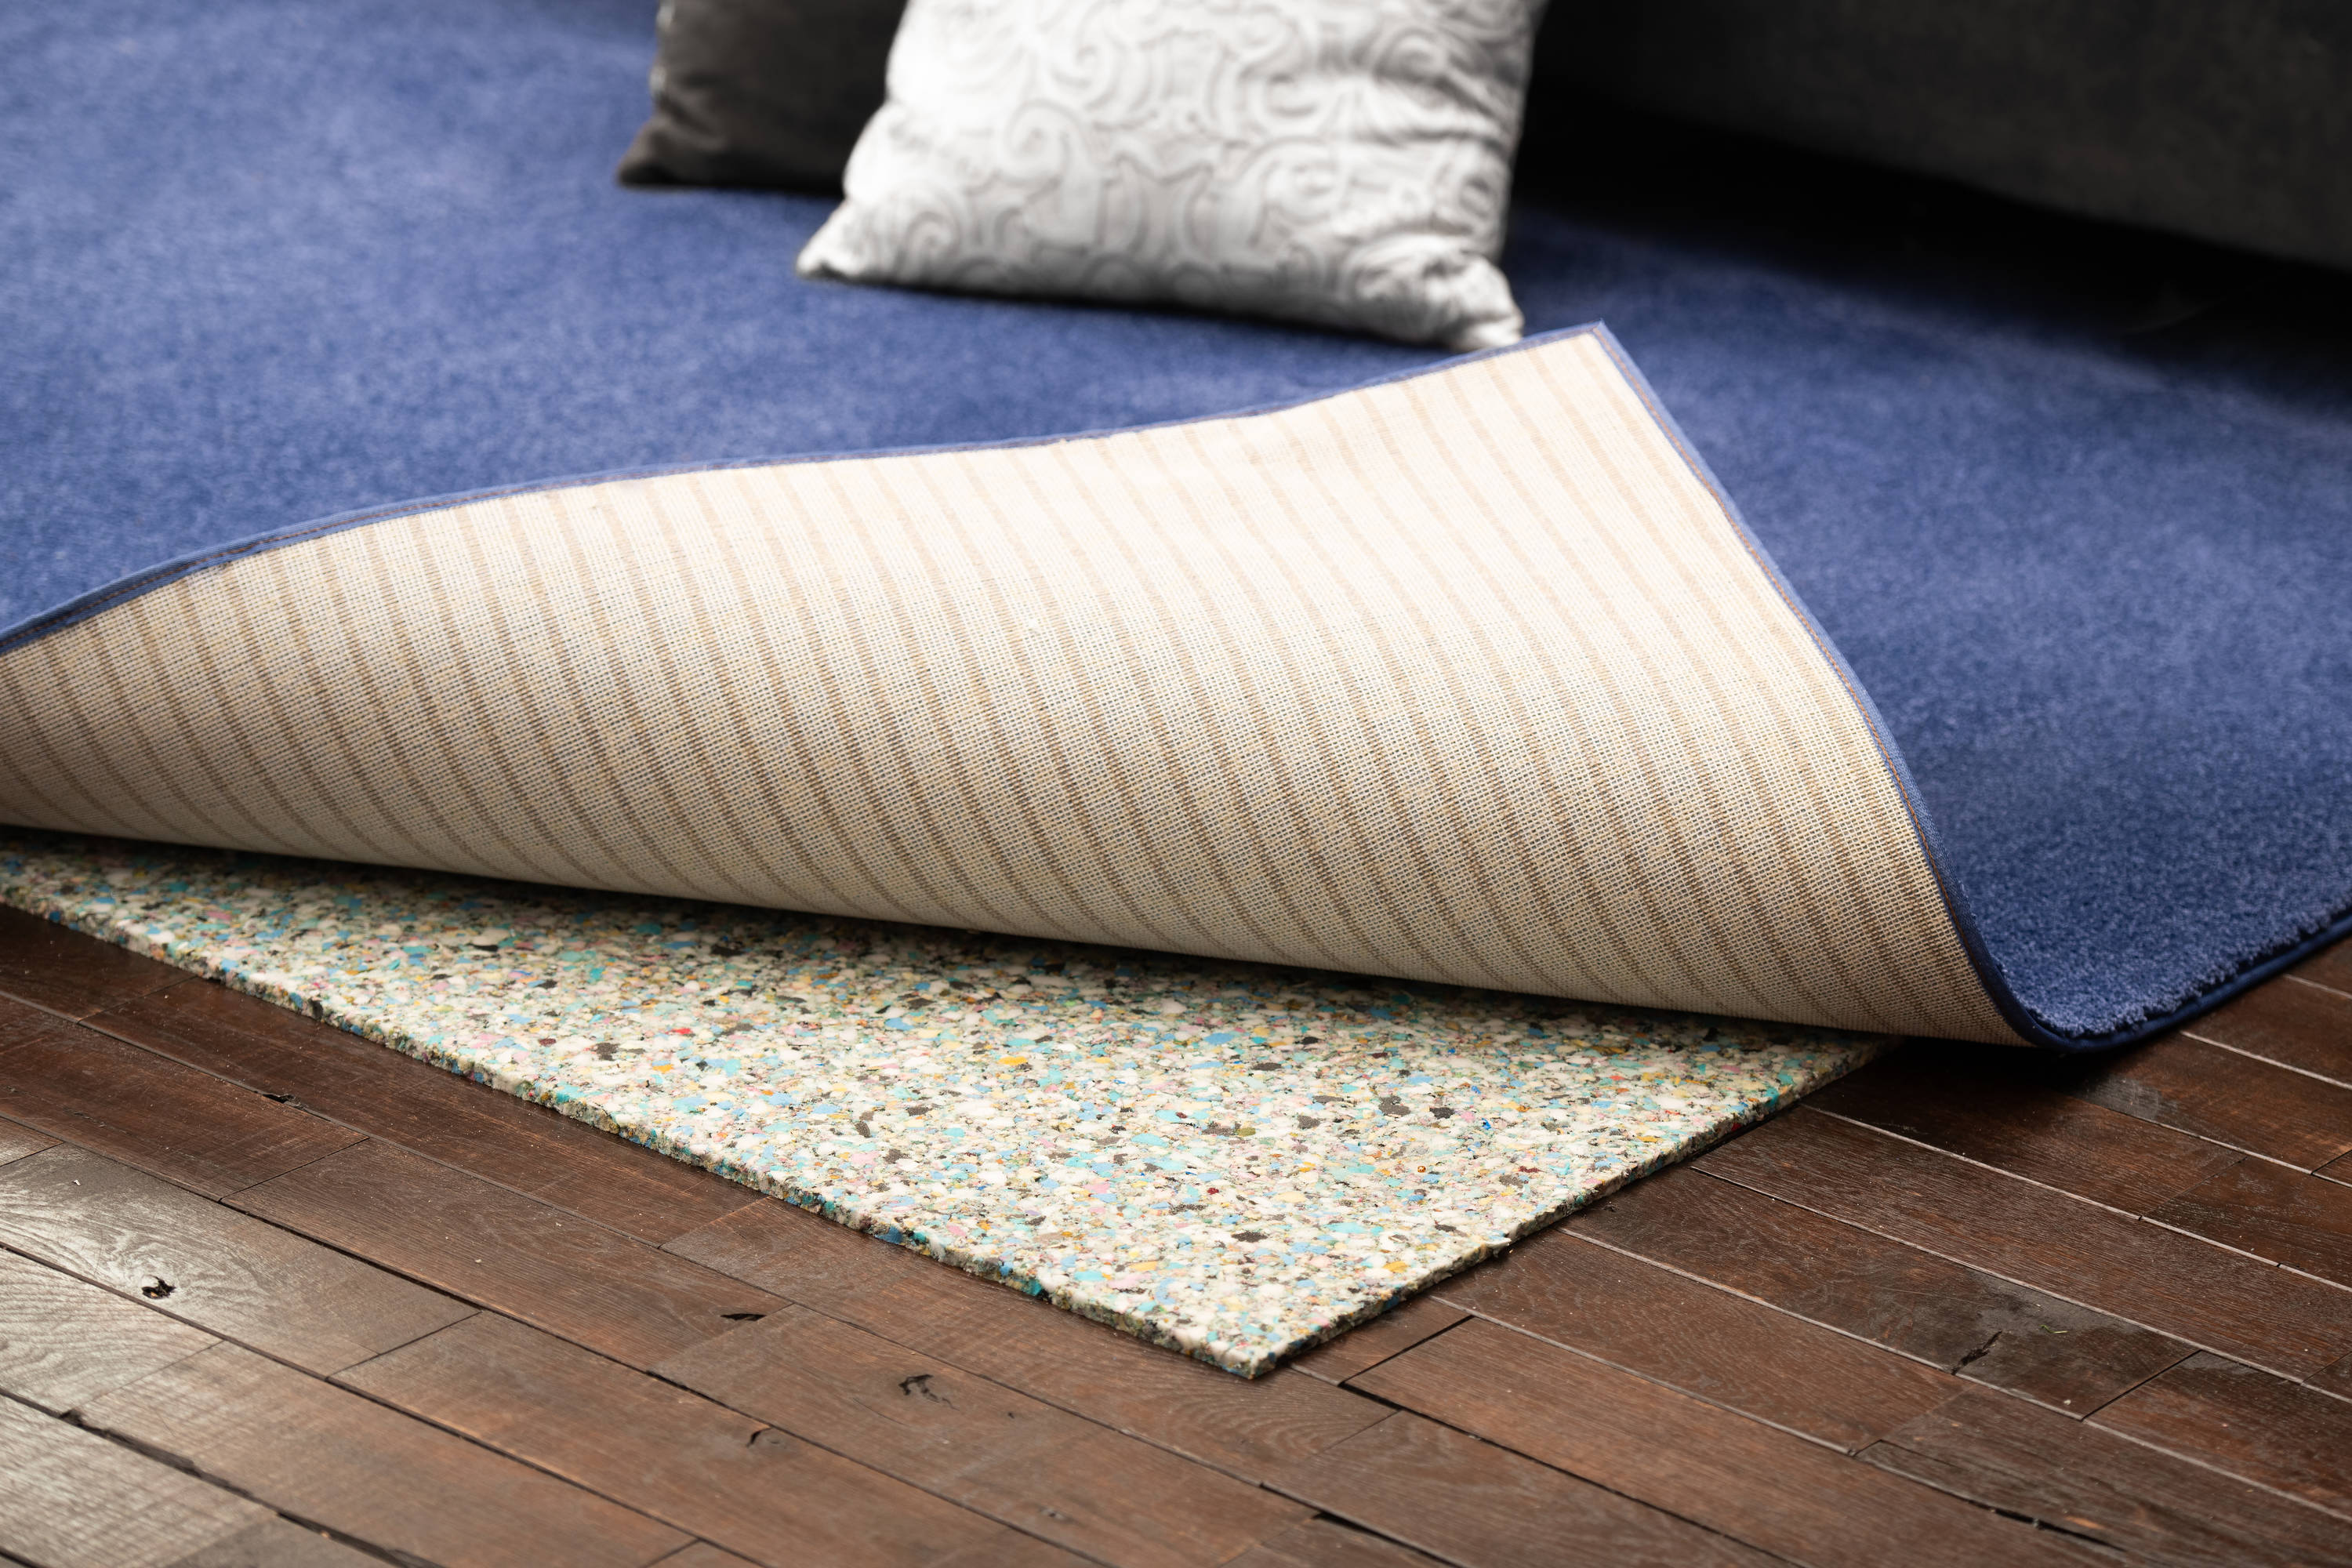 Kate PVC Non-slip Rug Pad for Keeping Floor Backdrop In Place(10x6.5ft)